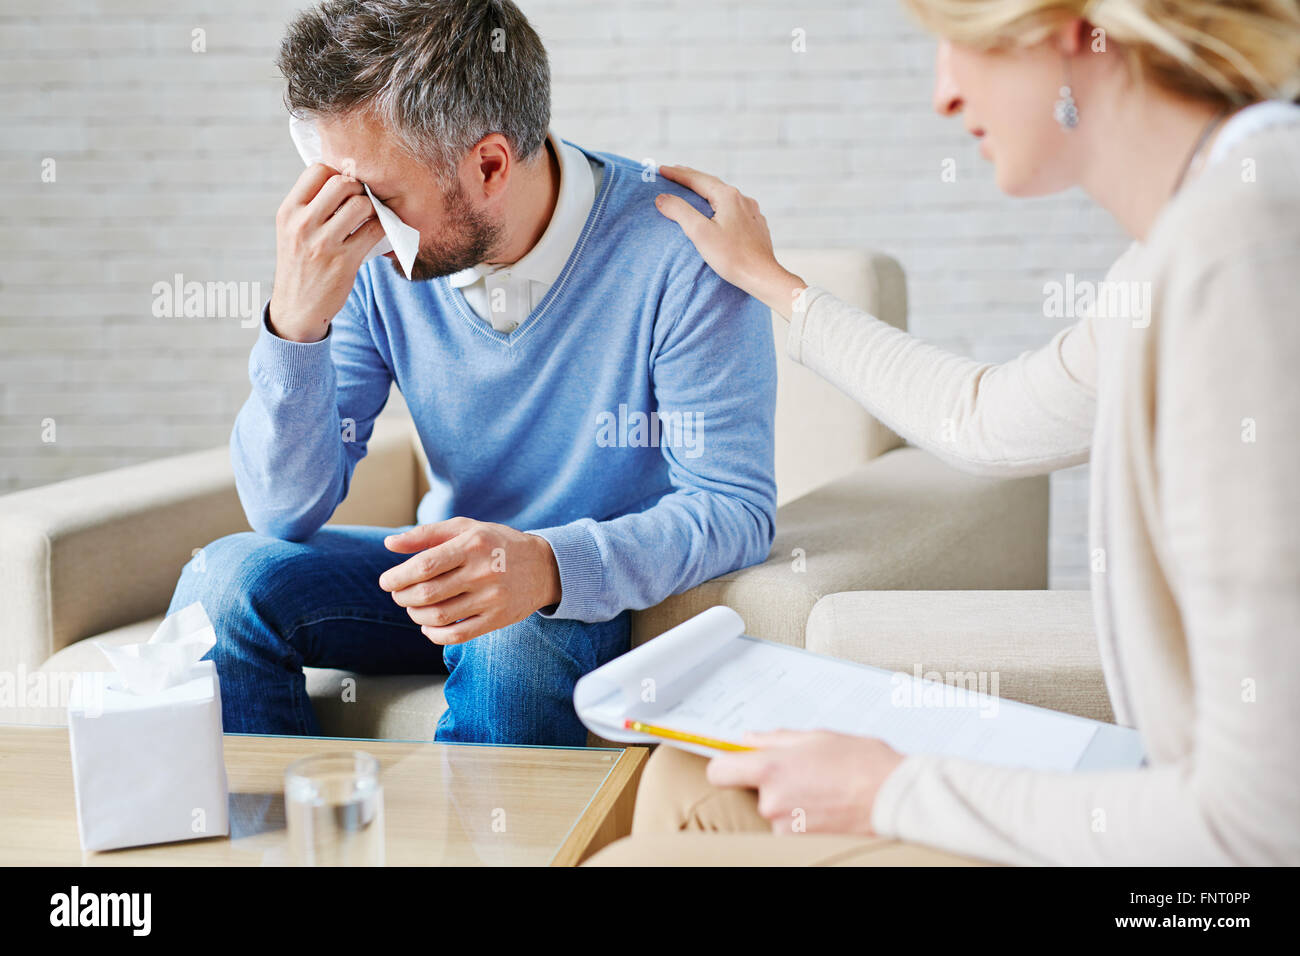 Depressed man crying while visiting his psychologist Stock Photo